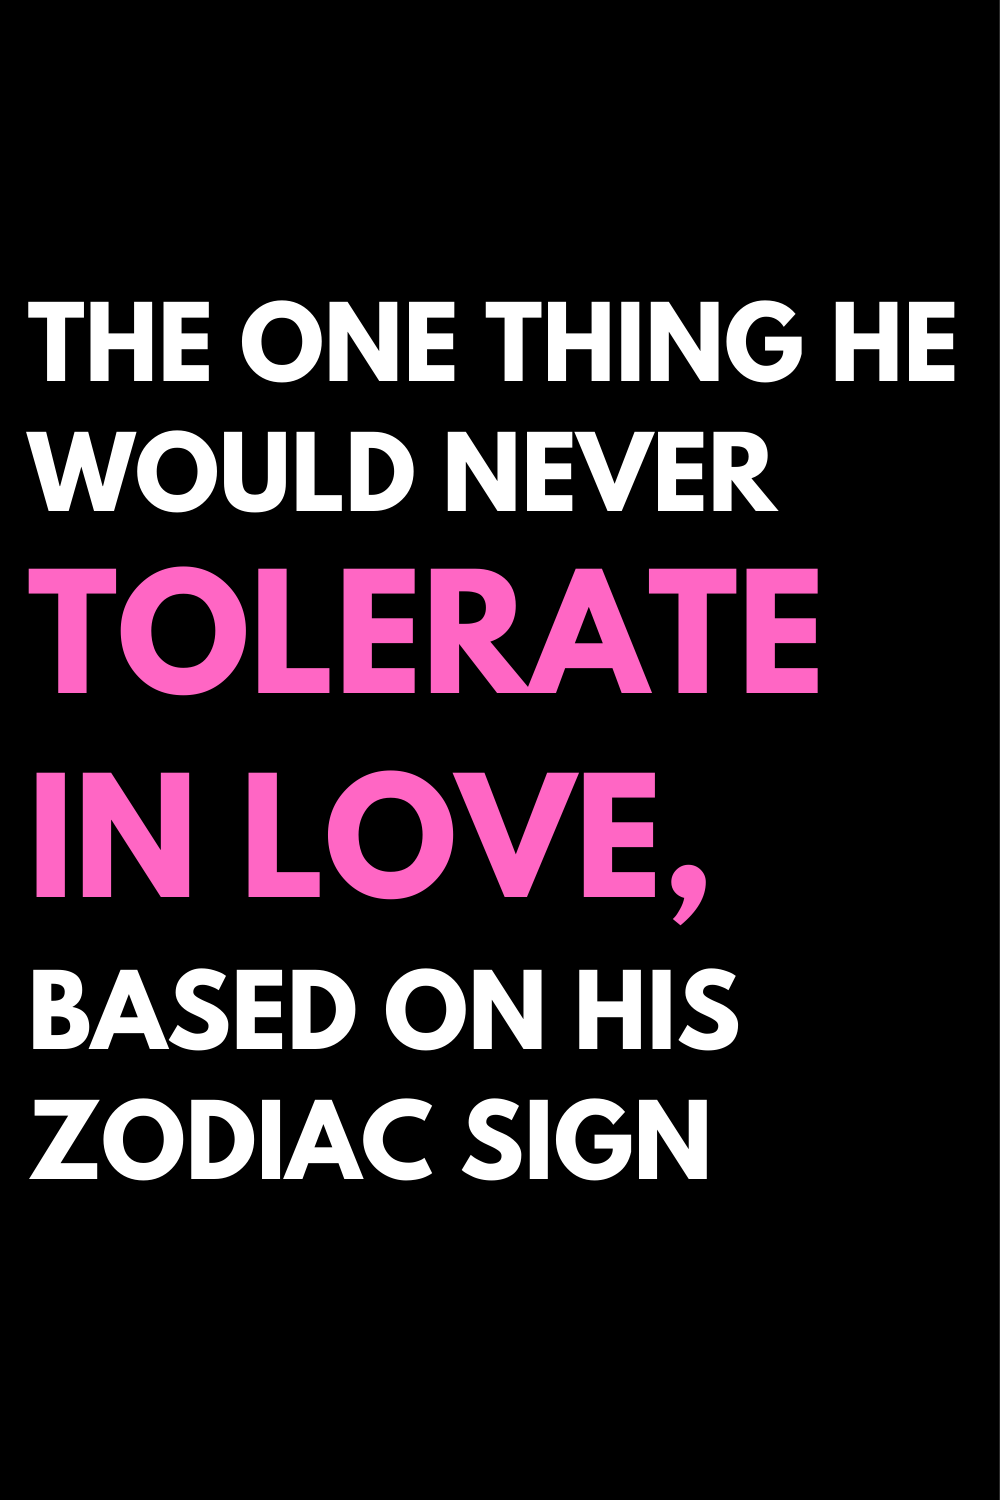 The One Thing He Would Never Tolerate In Love, Based On His Zodiac Sign